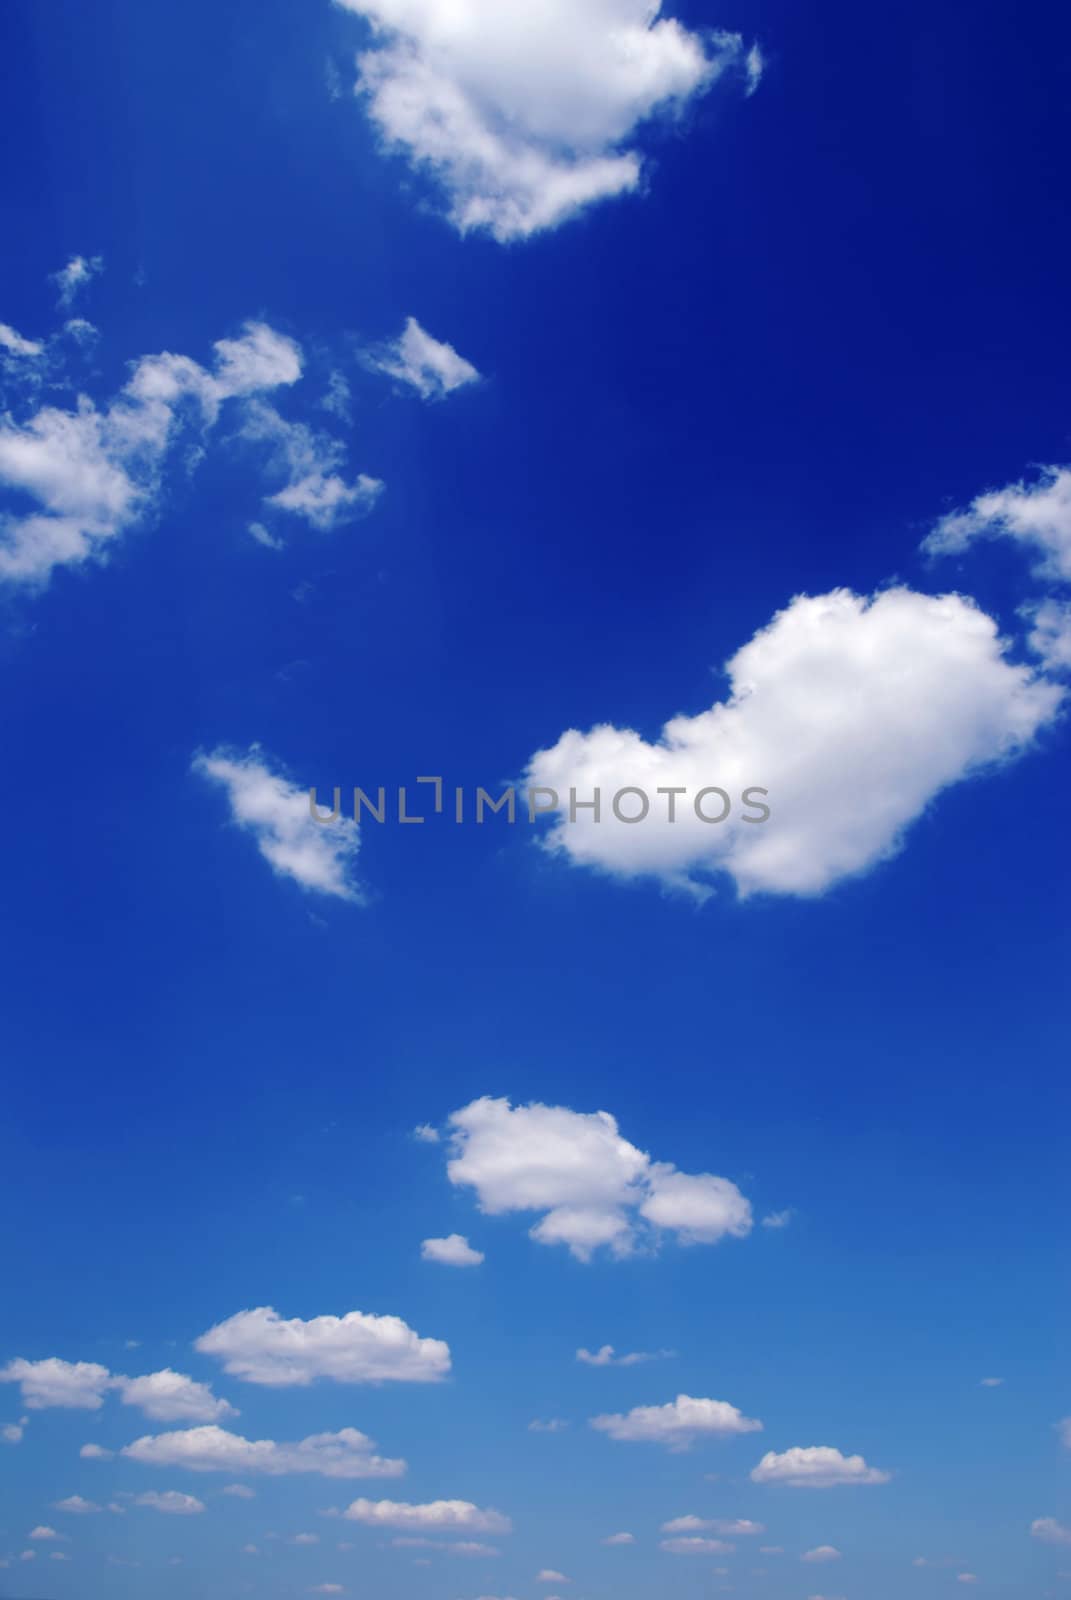 Sky full of small clouds - bright natural texture